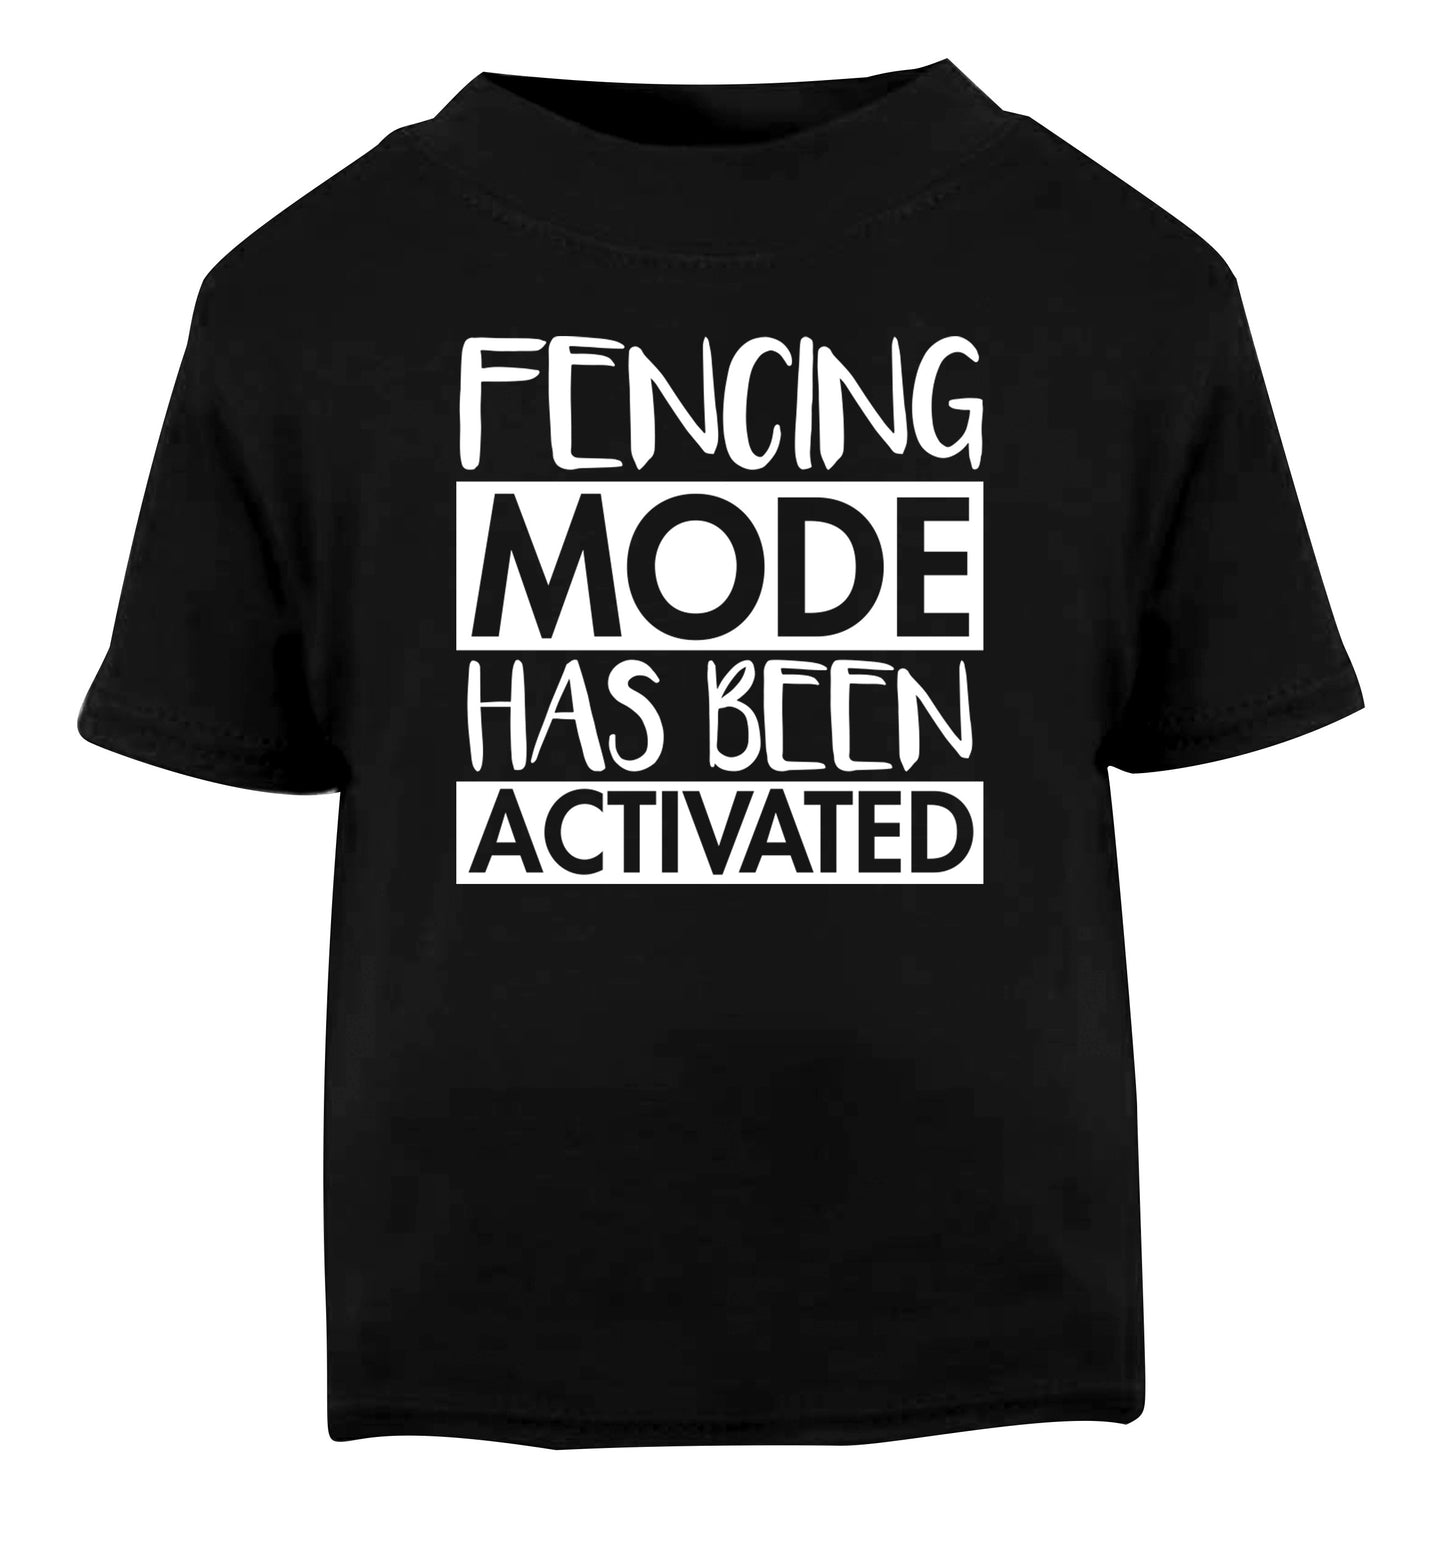 Fencing mode activated Black Baby Toddler Tshirt 2 years